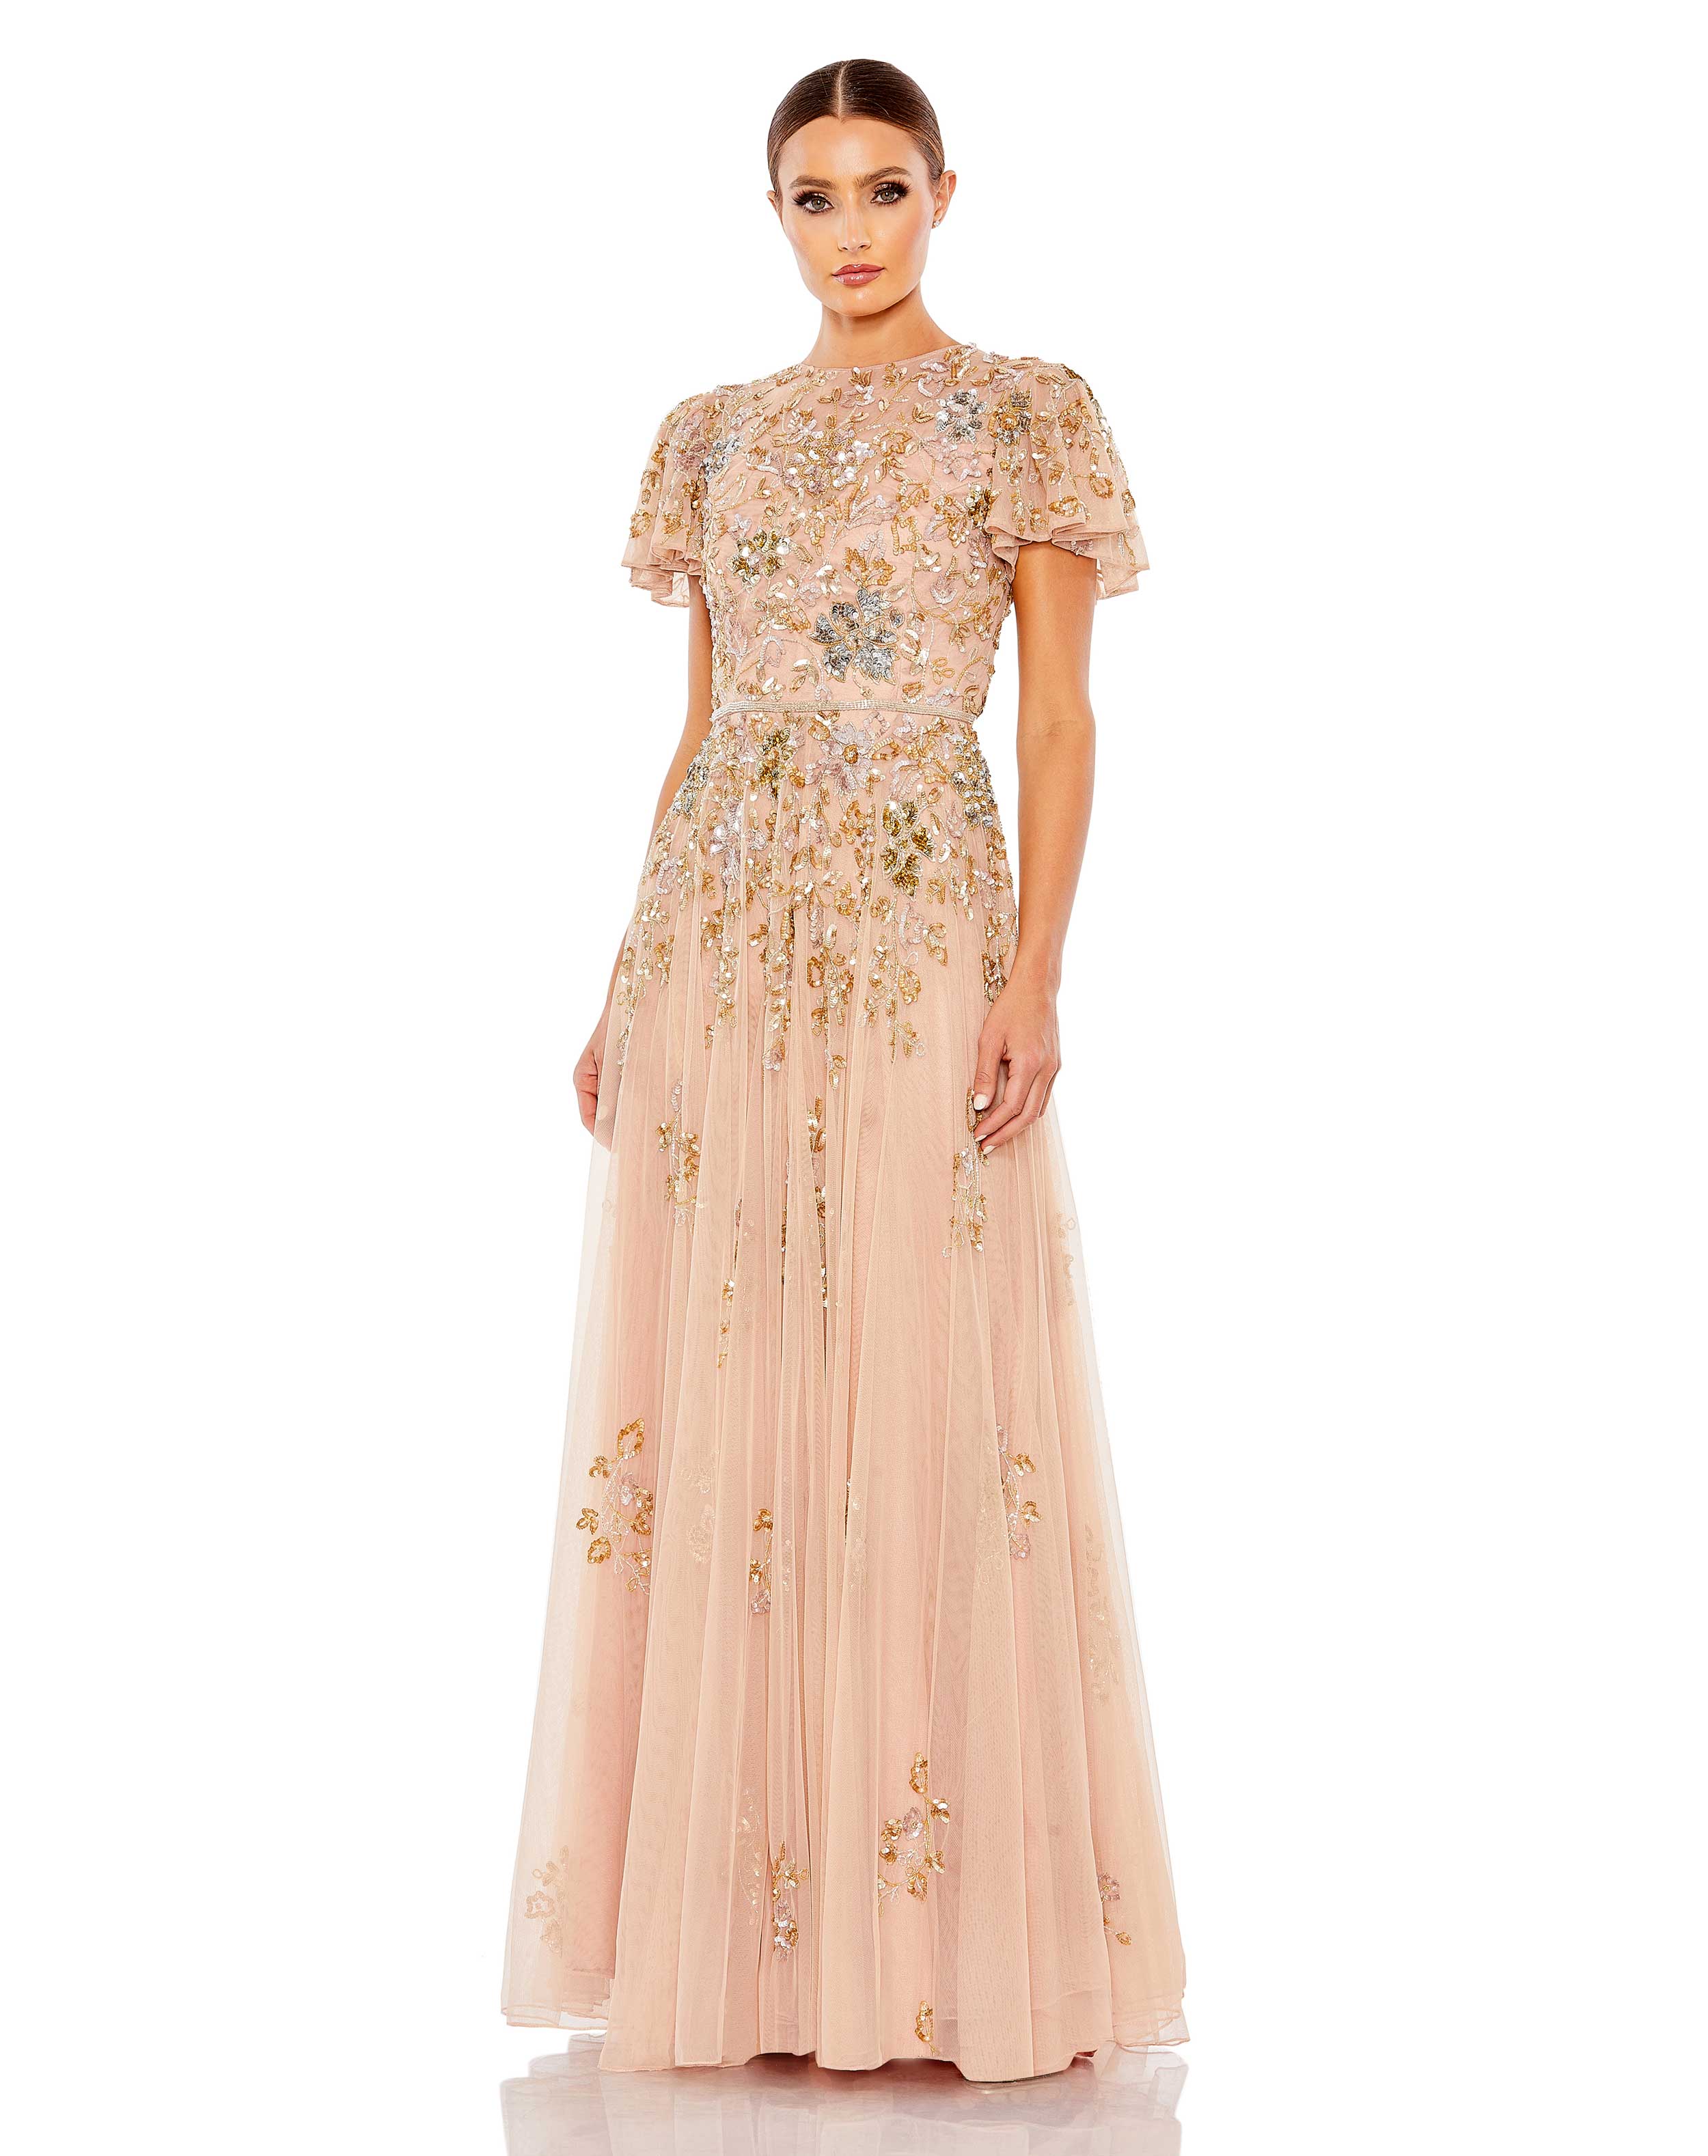 Embellished Butterfly Sleeve High Neck Gown - FINAL SALE